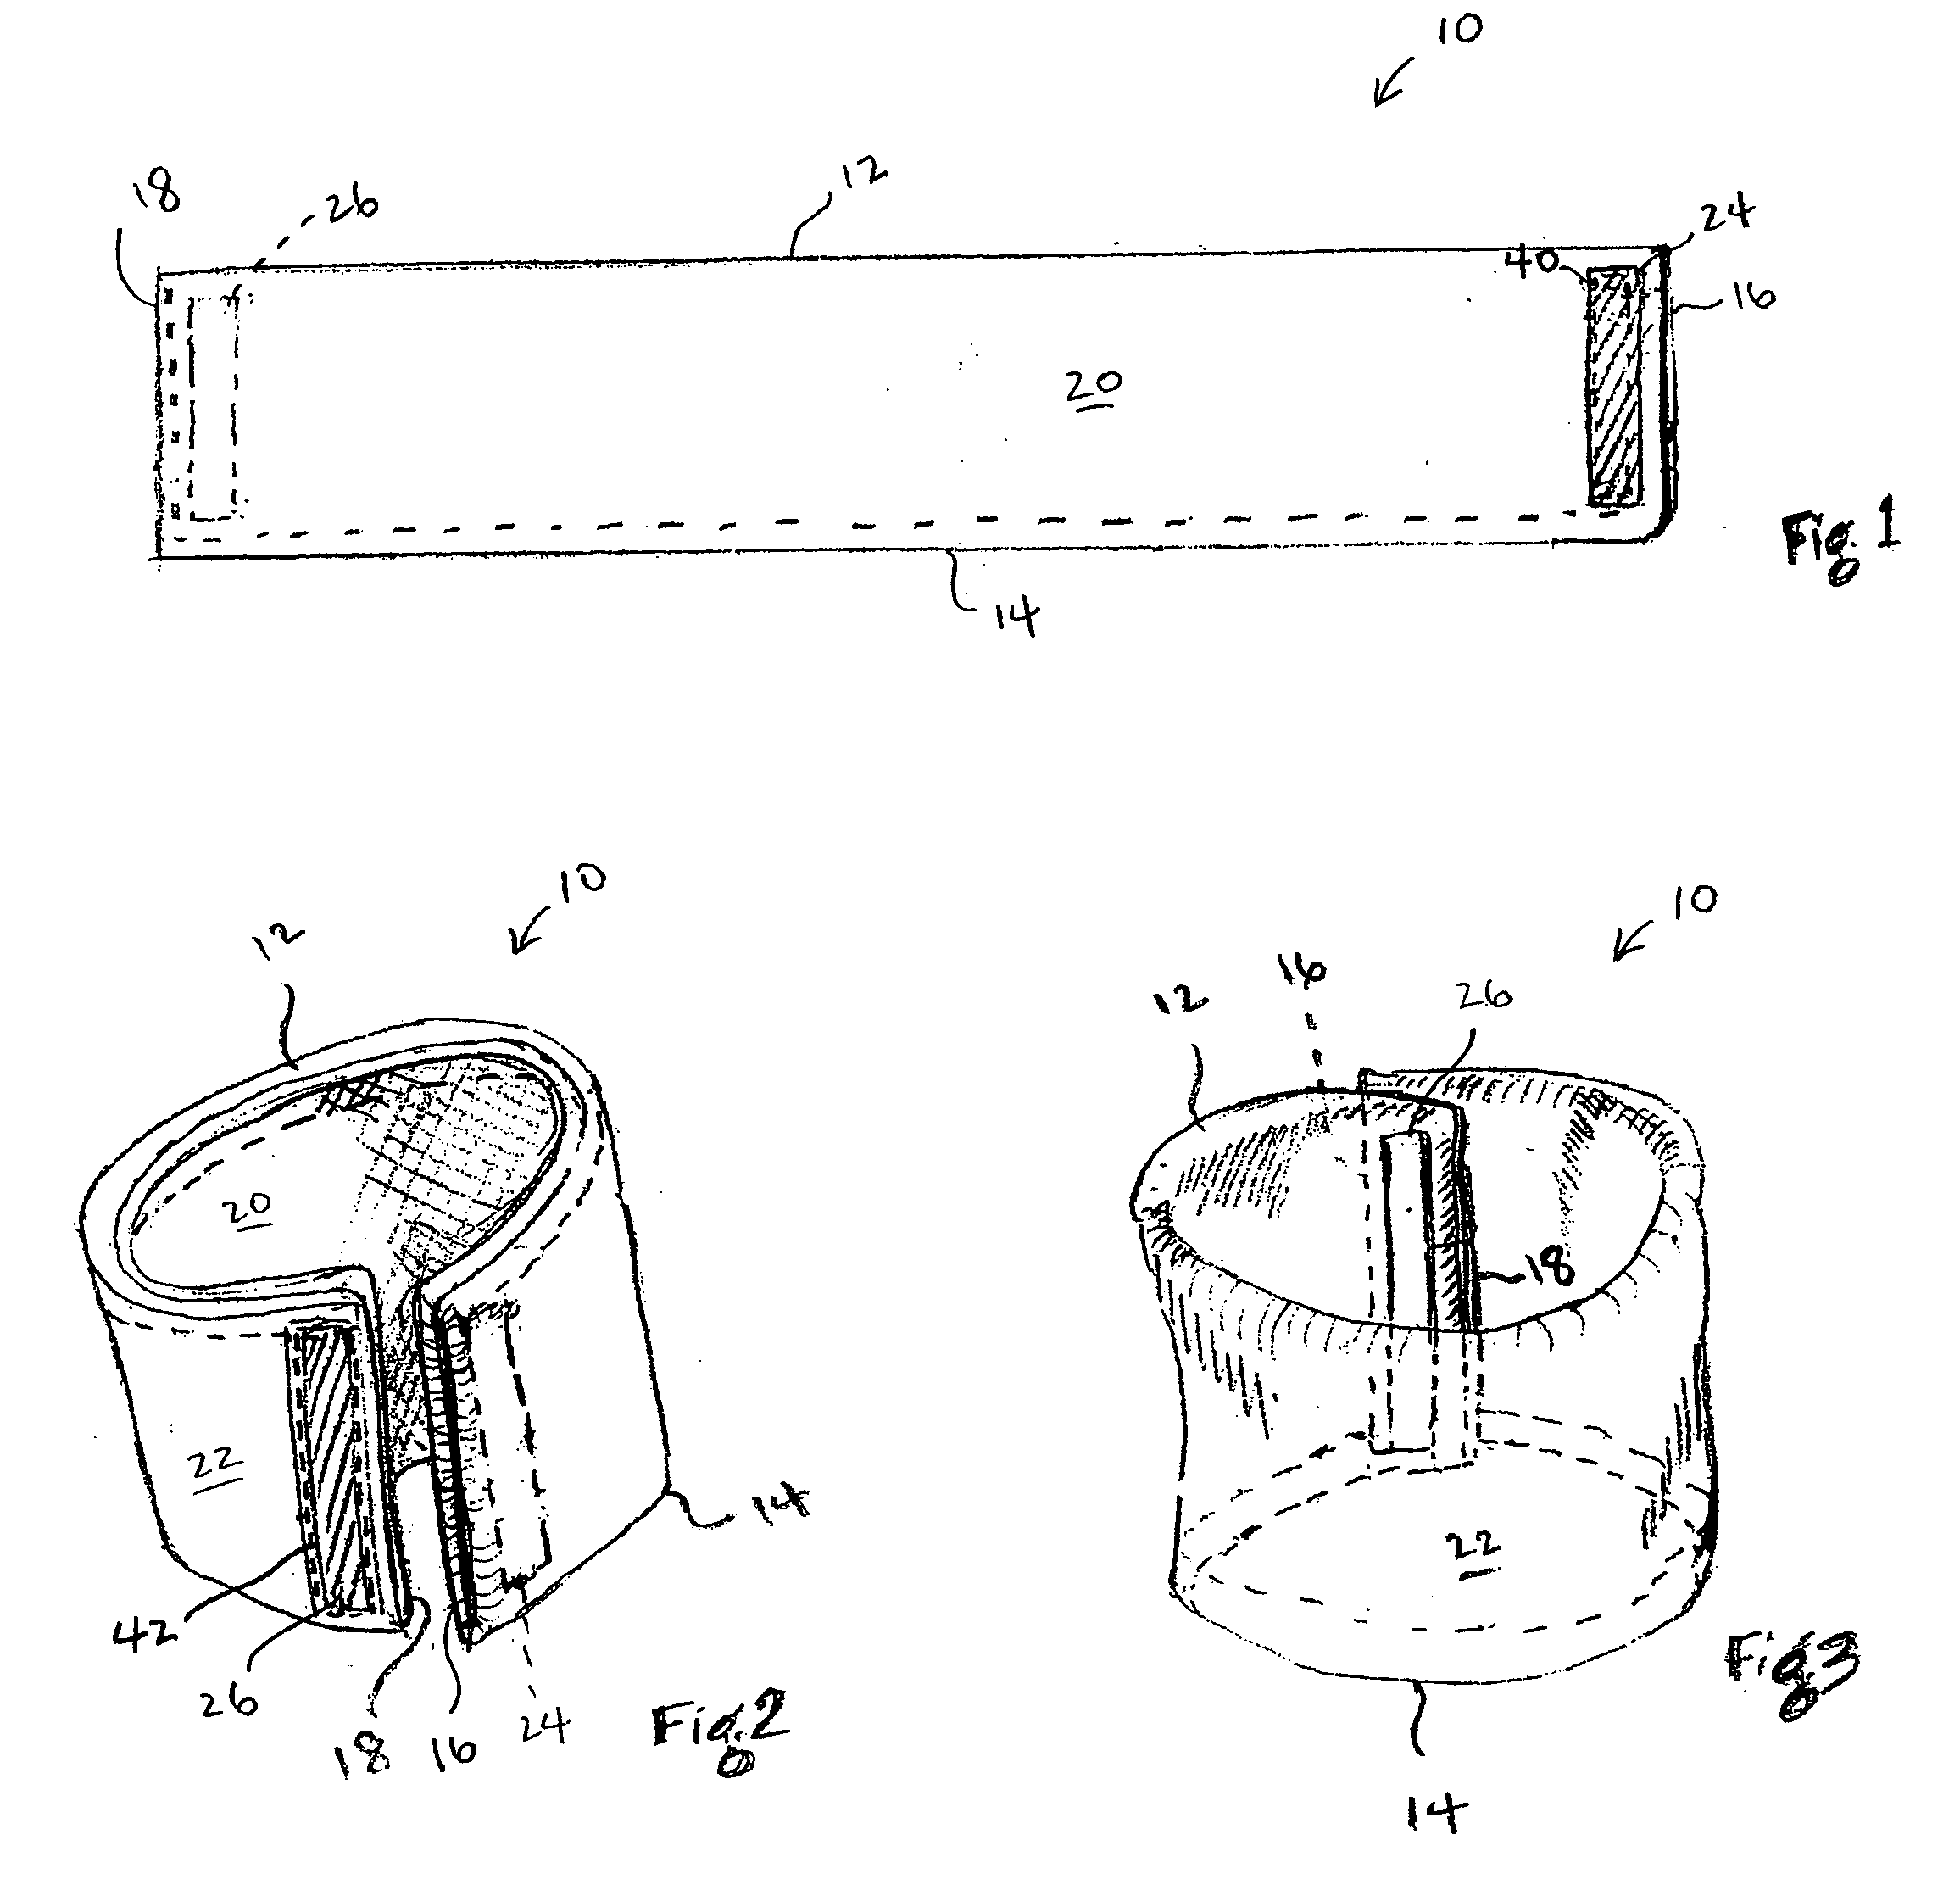 Neck warmer and method for making same